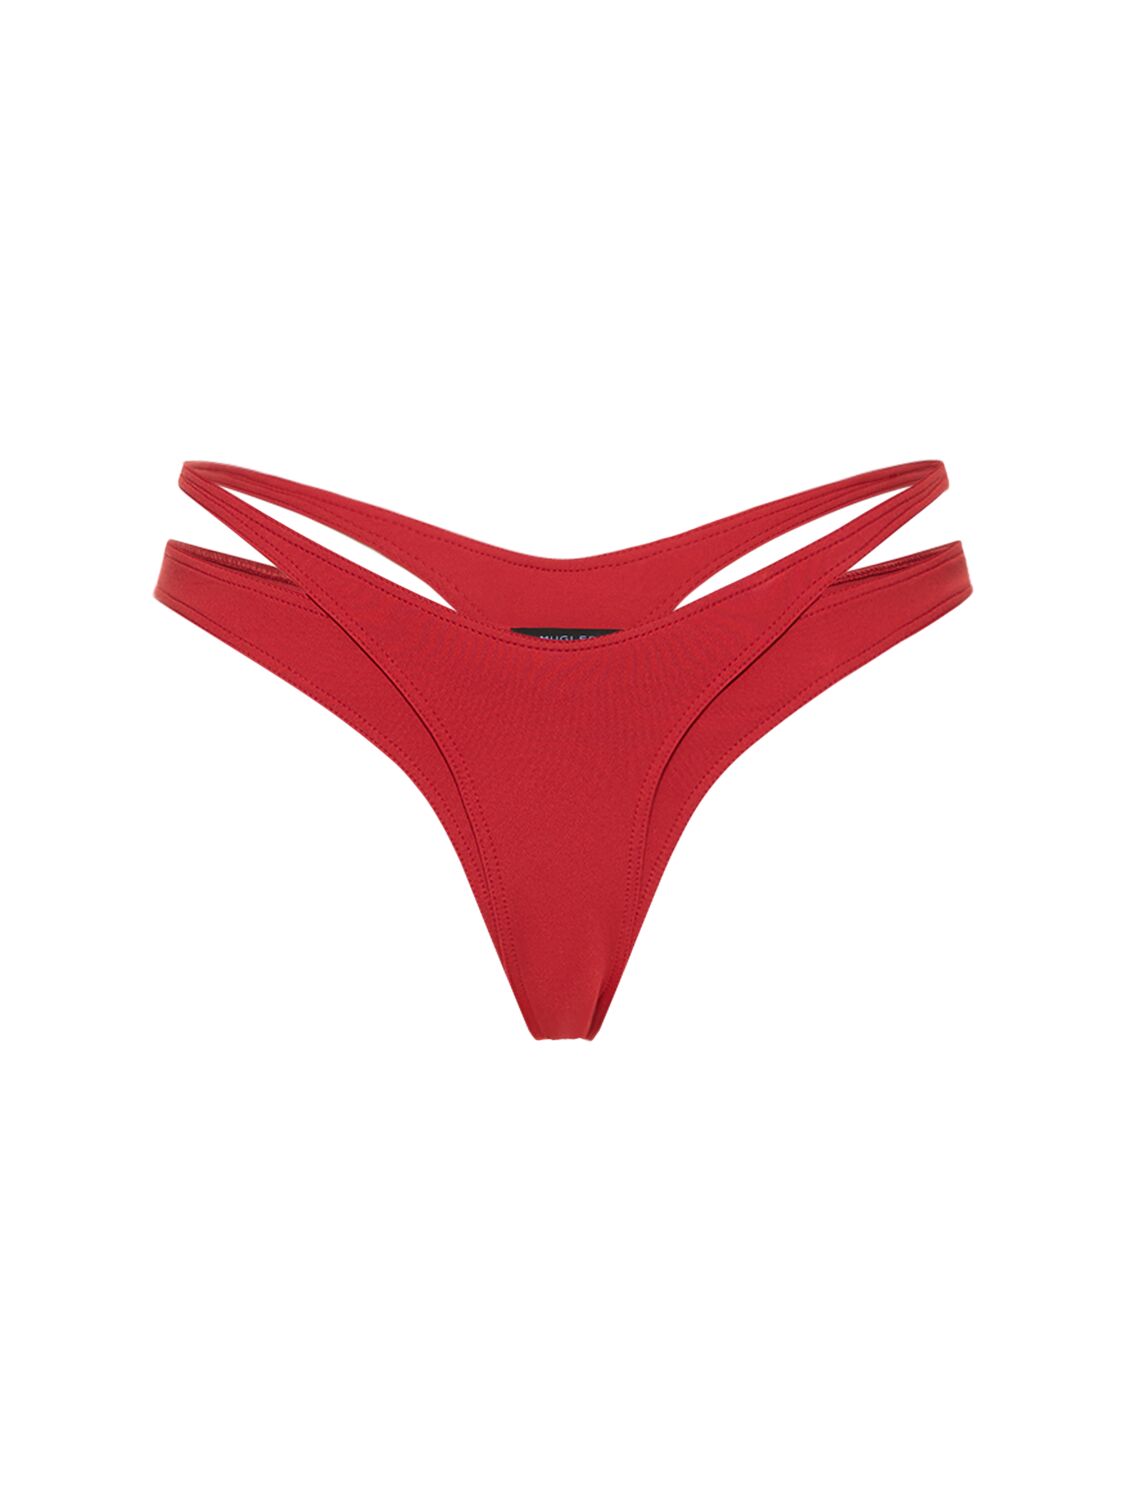 New Look V-front bikini bottoms in pink tropical